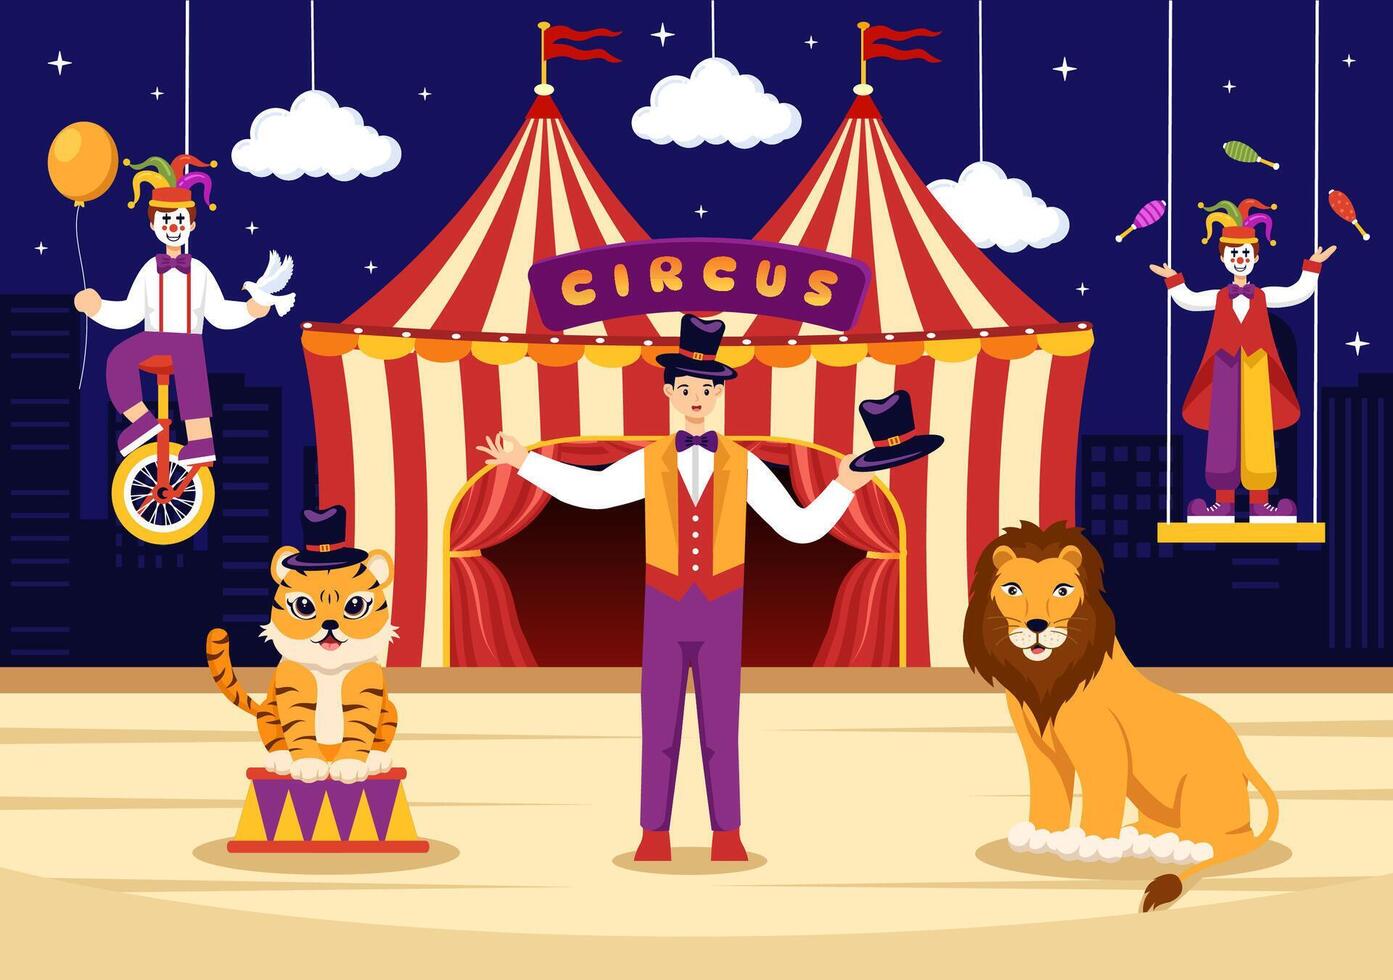 Circus Vector Illustration with Show of Gymnast, Magician, Animal Lion Tiger, Host, Entertainer, Clowns and Amusement Park in Flat Cartoon Background